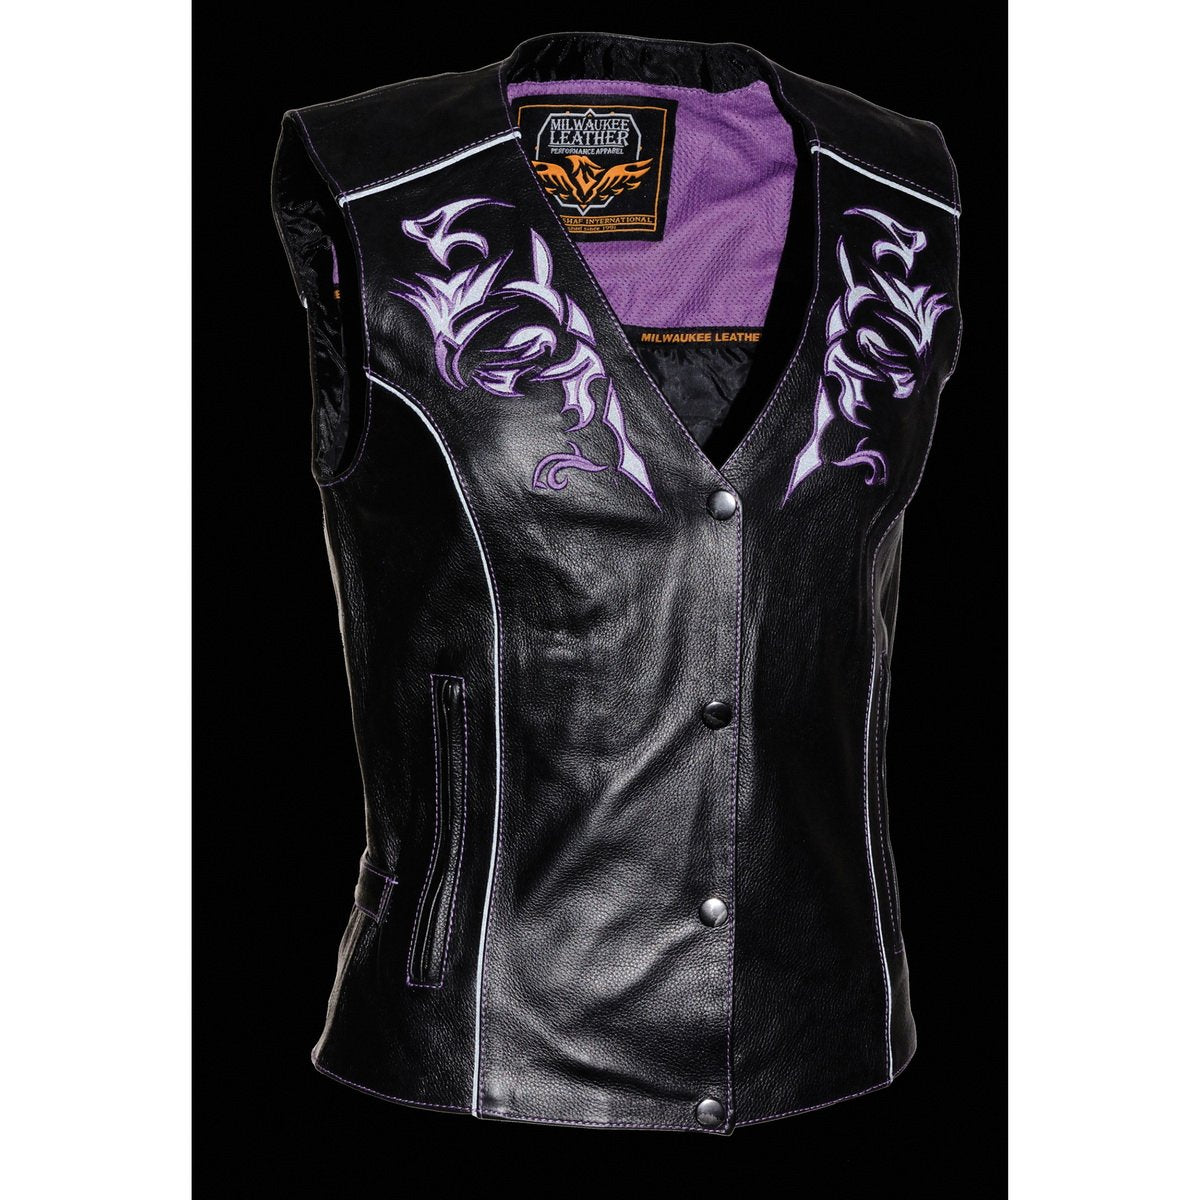 Milwaukee Leather ML1296 Women's Black and Purple Vest with Reflective Tribal Design - Milwaukee Leather Womens Leather Vests